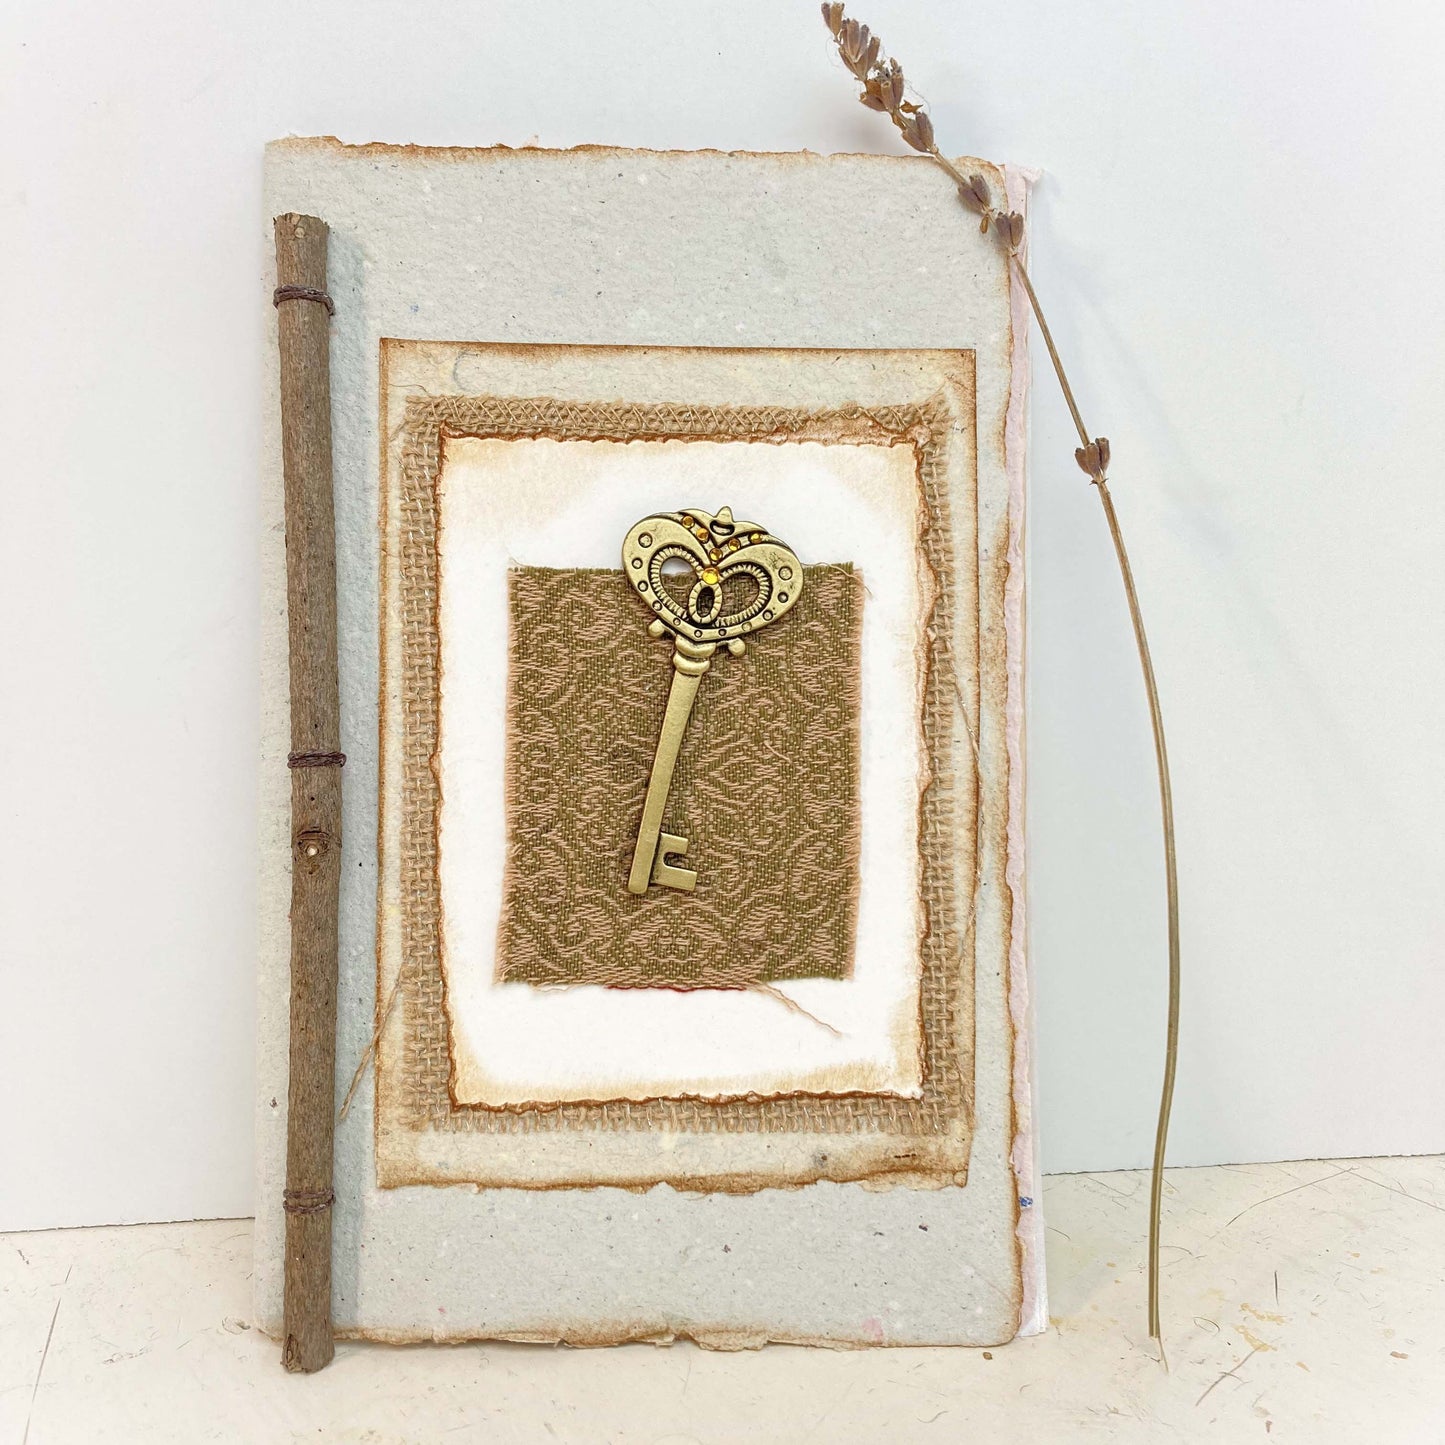 Art Journal with Handmade Paper Cover featuring a Vintage-style Key, Variety of Mixed Media Pages, Hand Sewn Binding with Stick Inserted